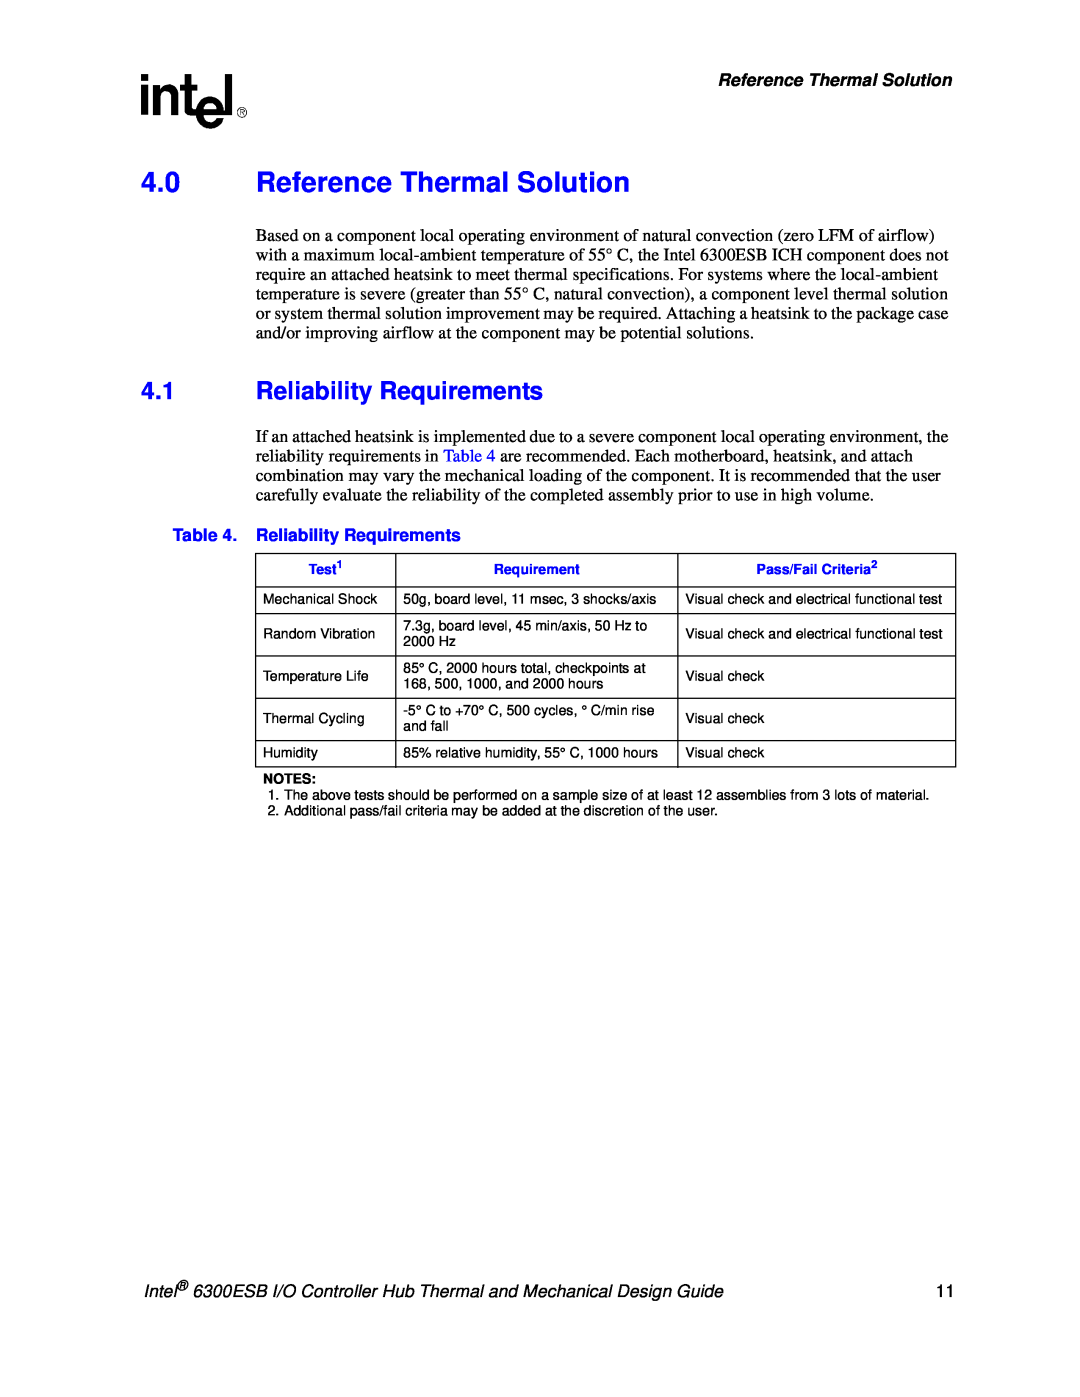 Intel 6300ESB manual 4.0Reference Thermal Solution, 4.1Reliability Requirements 